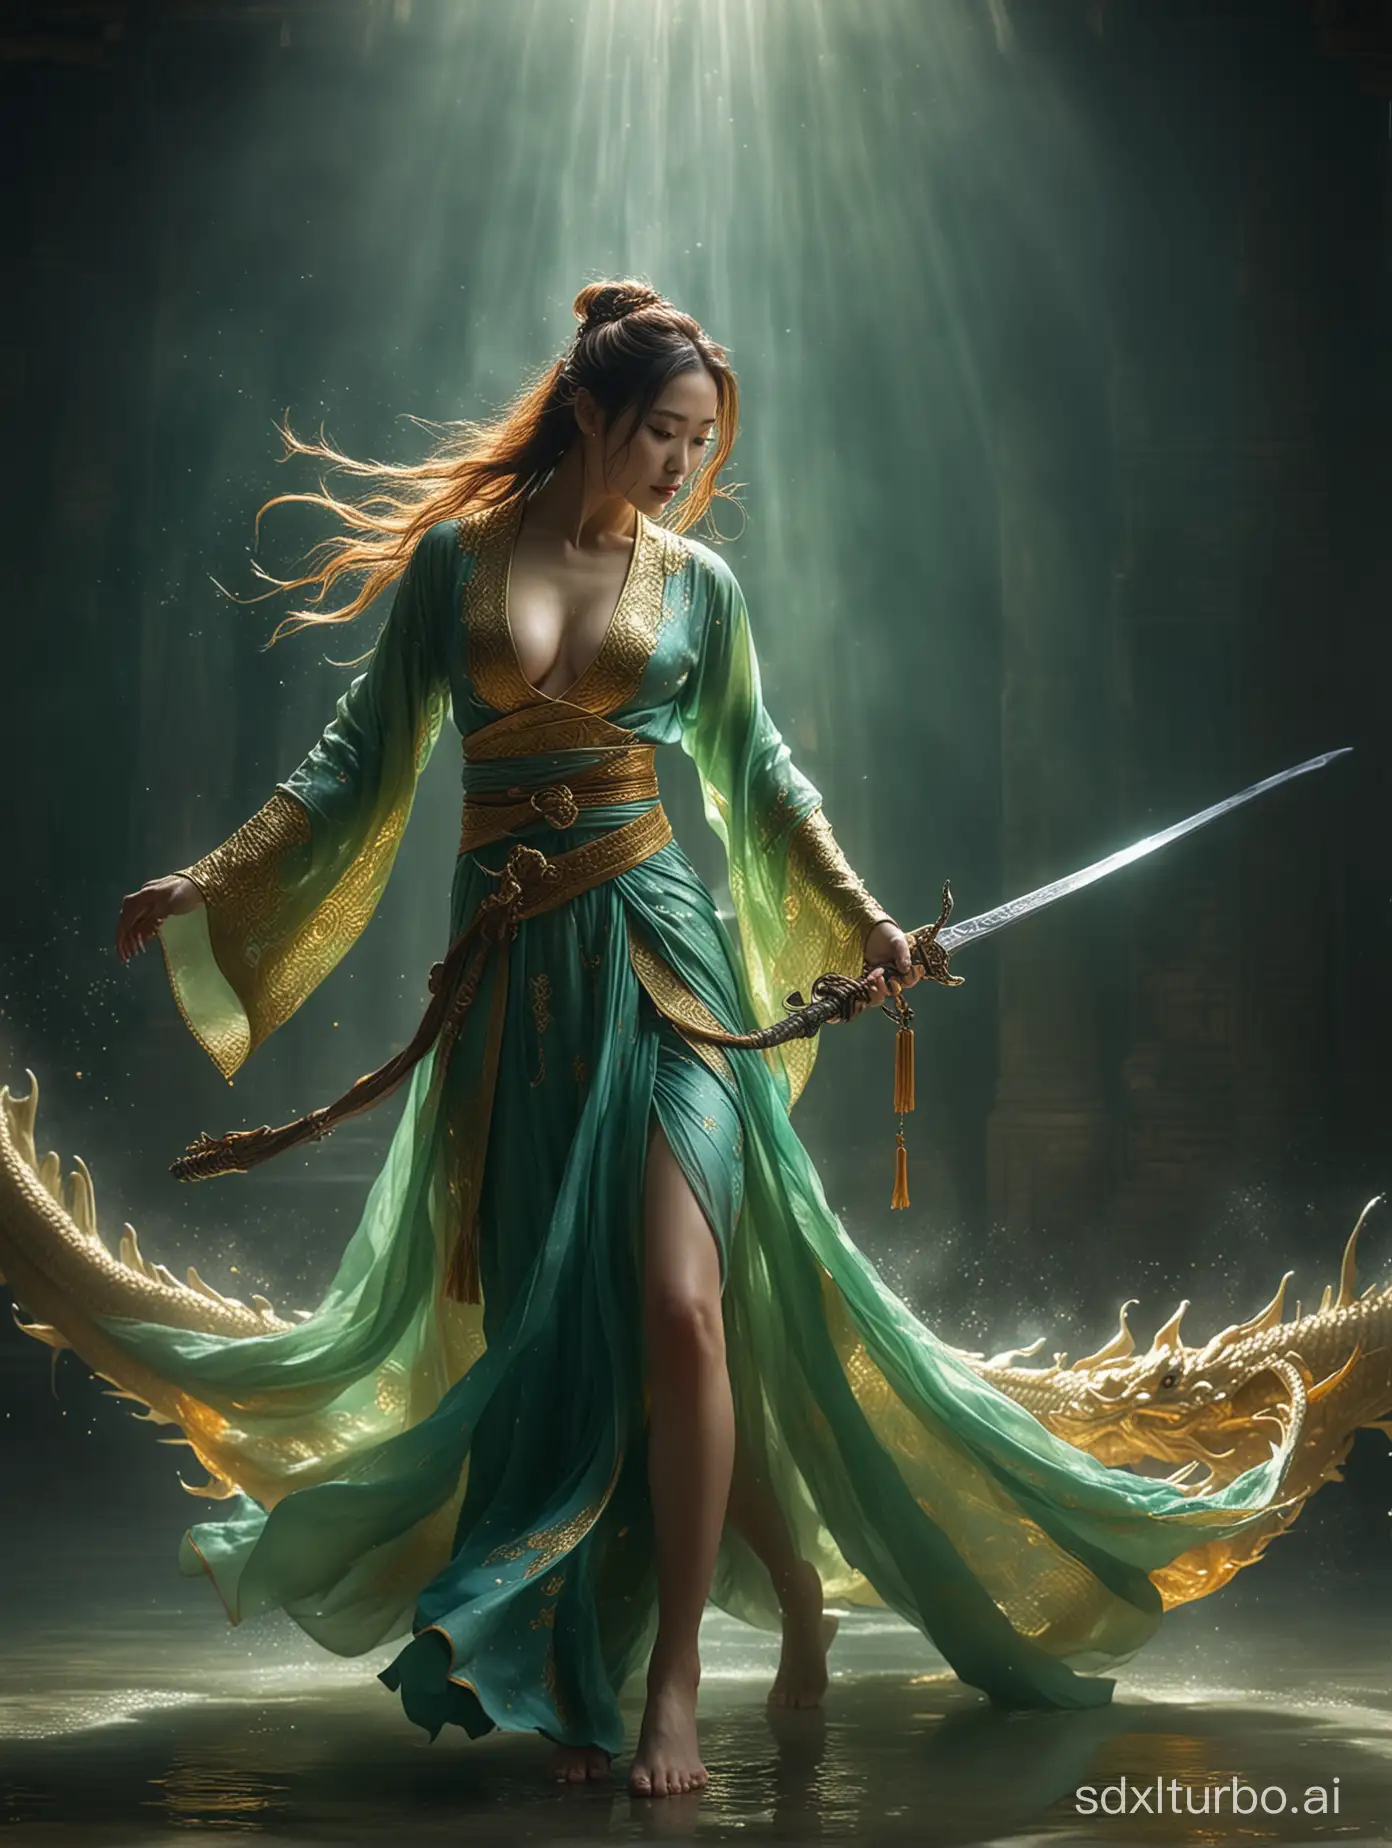 Epic-Sword-Dance-of-an-Oriental-Beauty-with-a-Glowing-Dragon